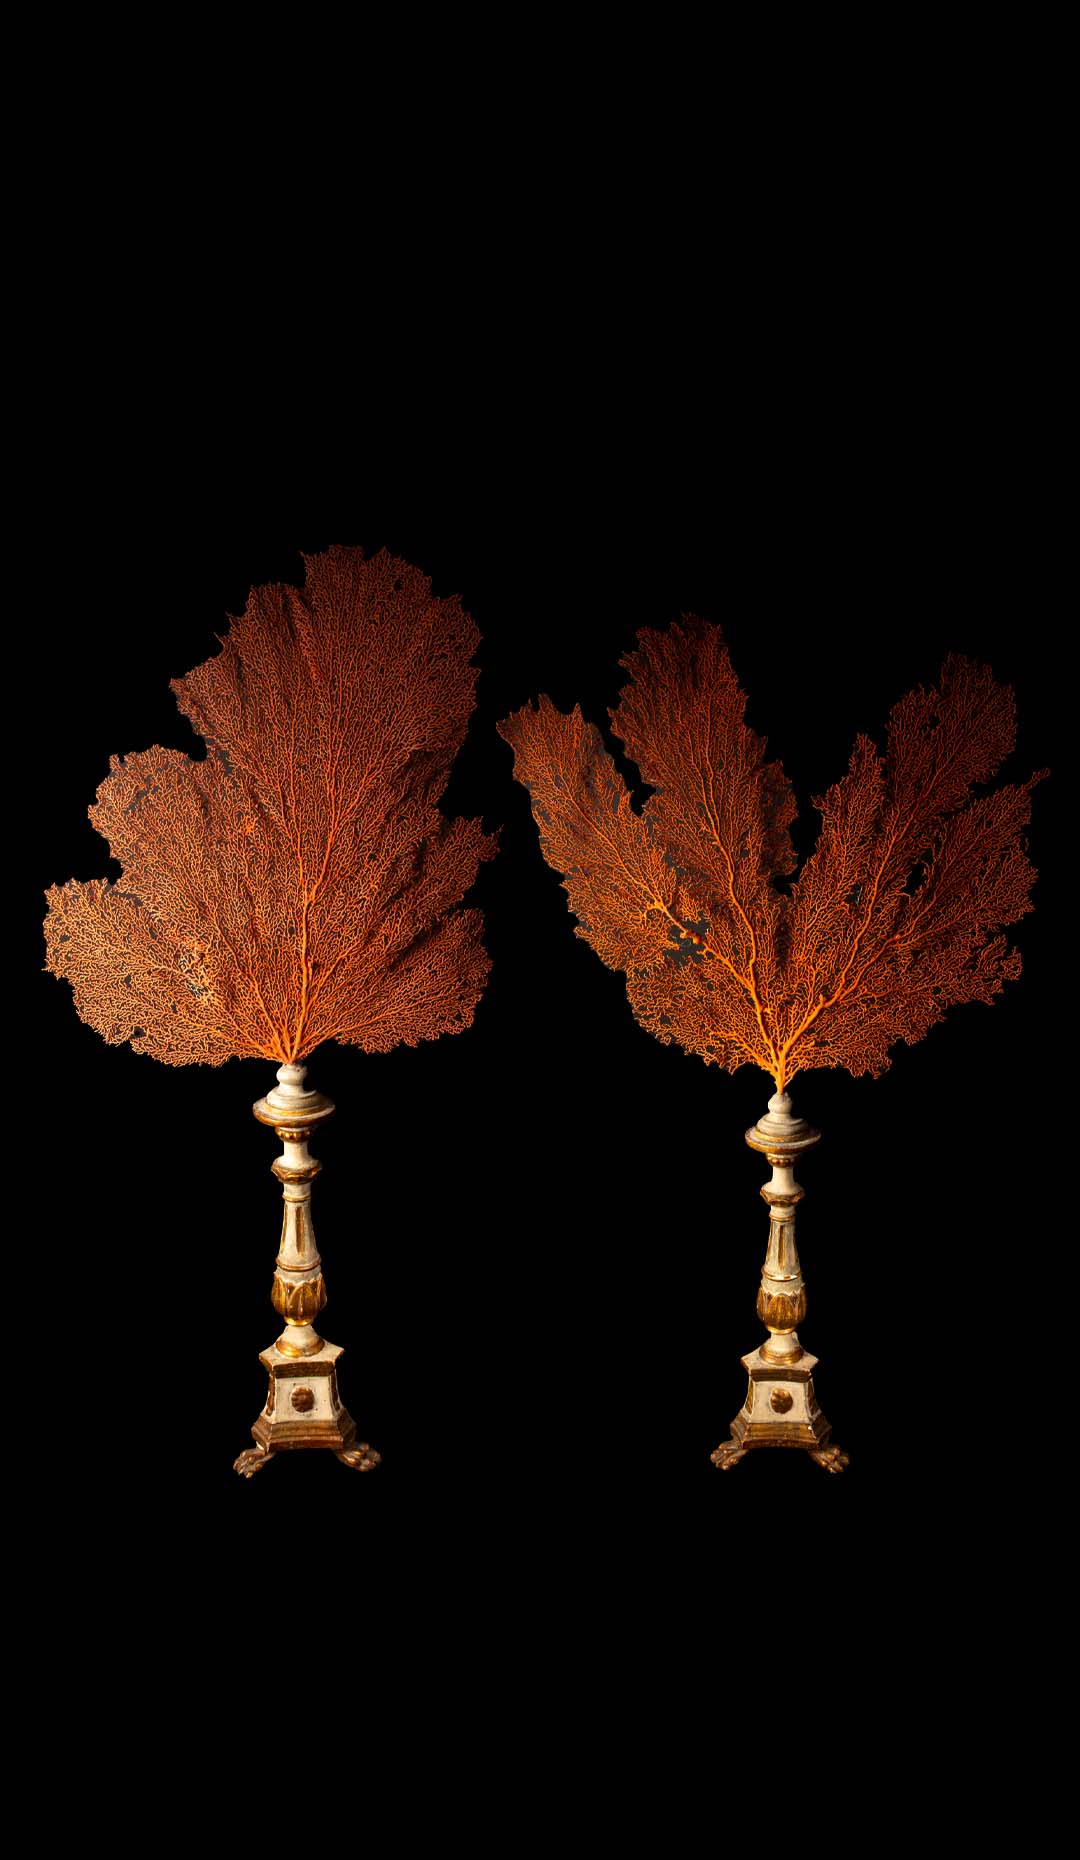 Pair of Seafans Mounted on a 19th Century Italian Gilt and Painted Bases